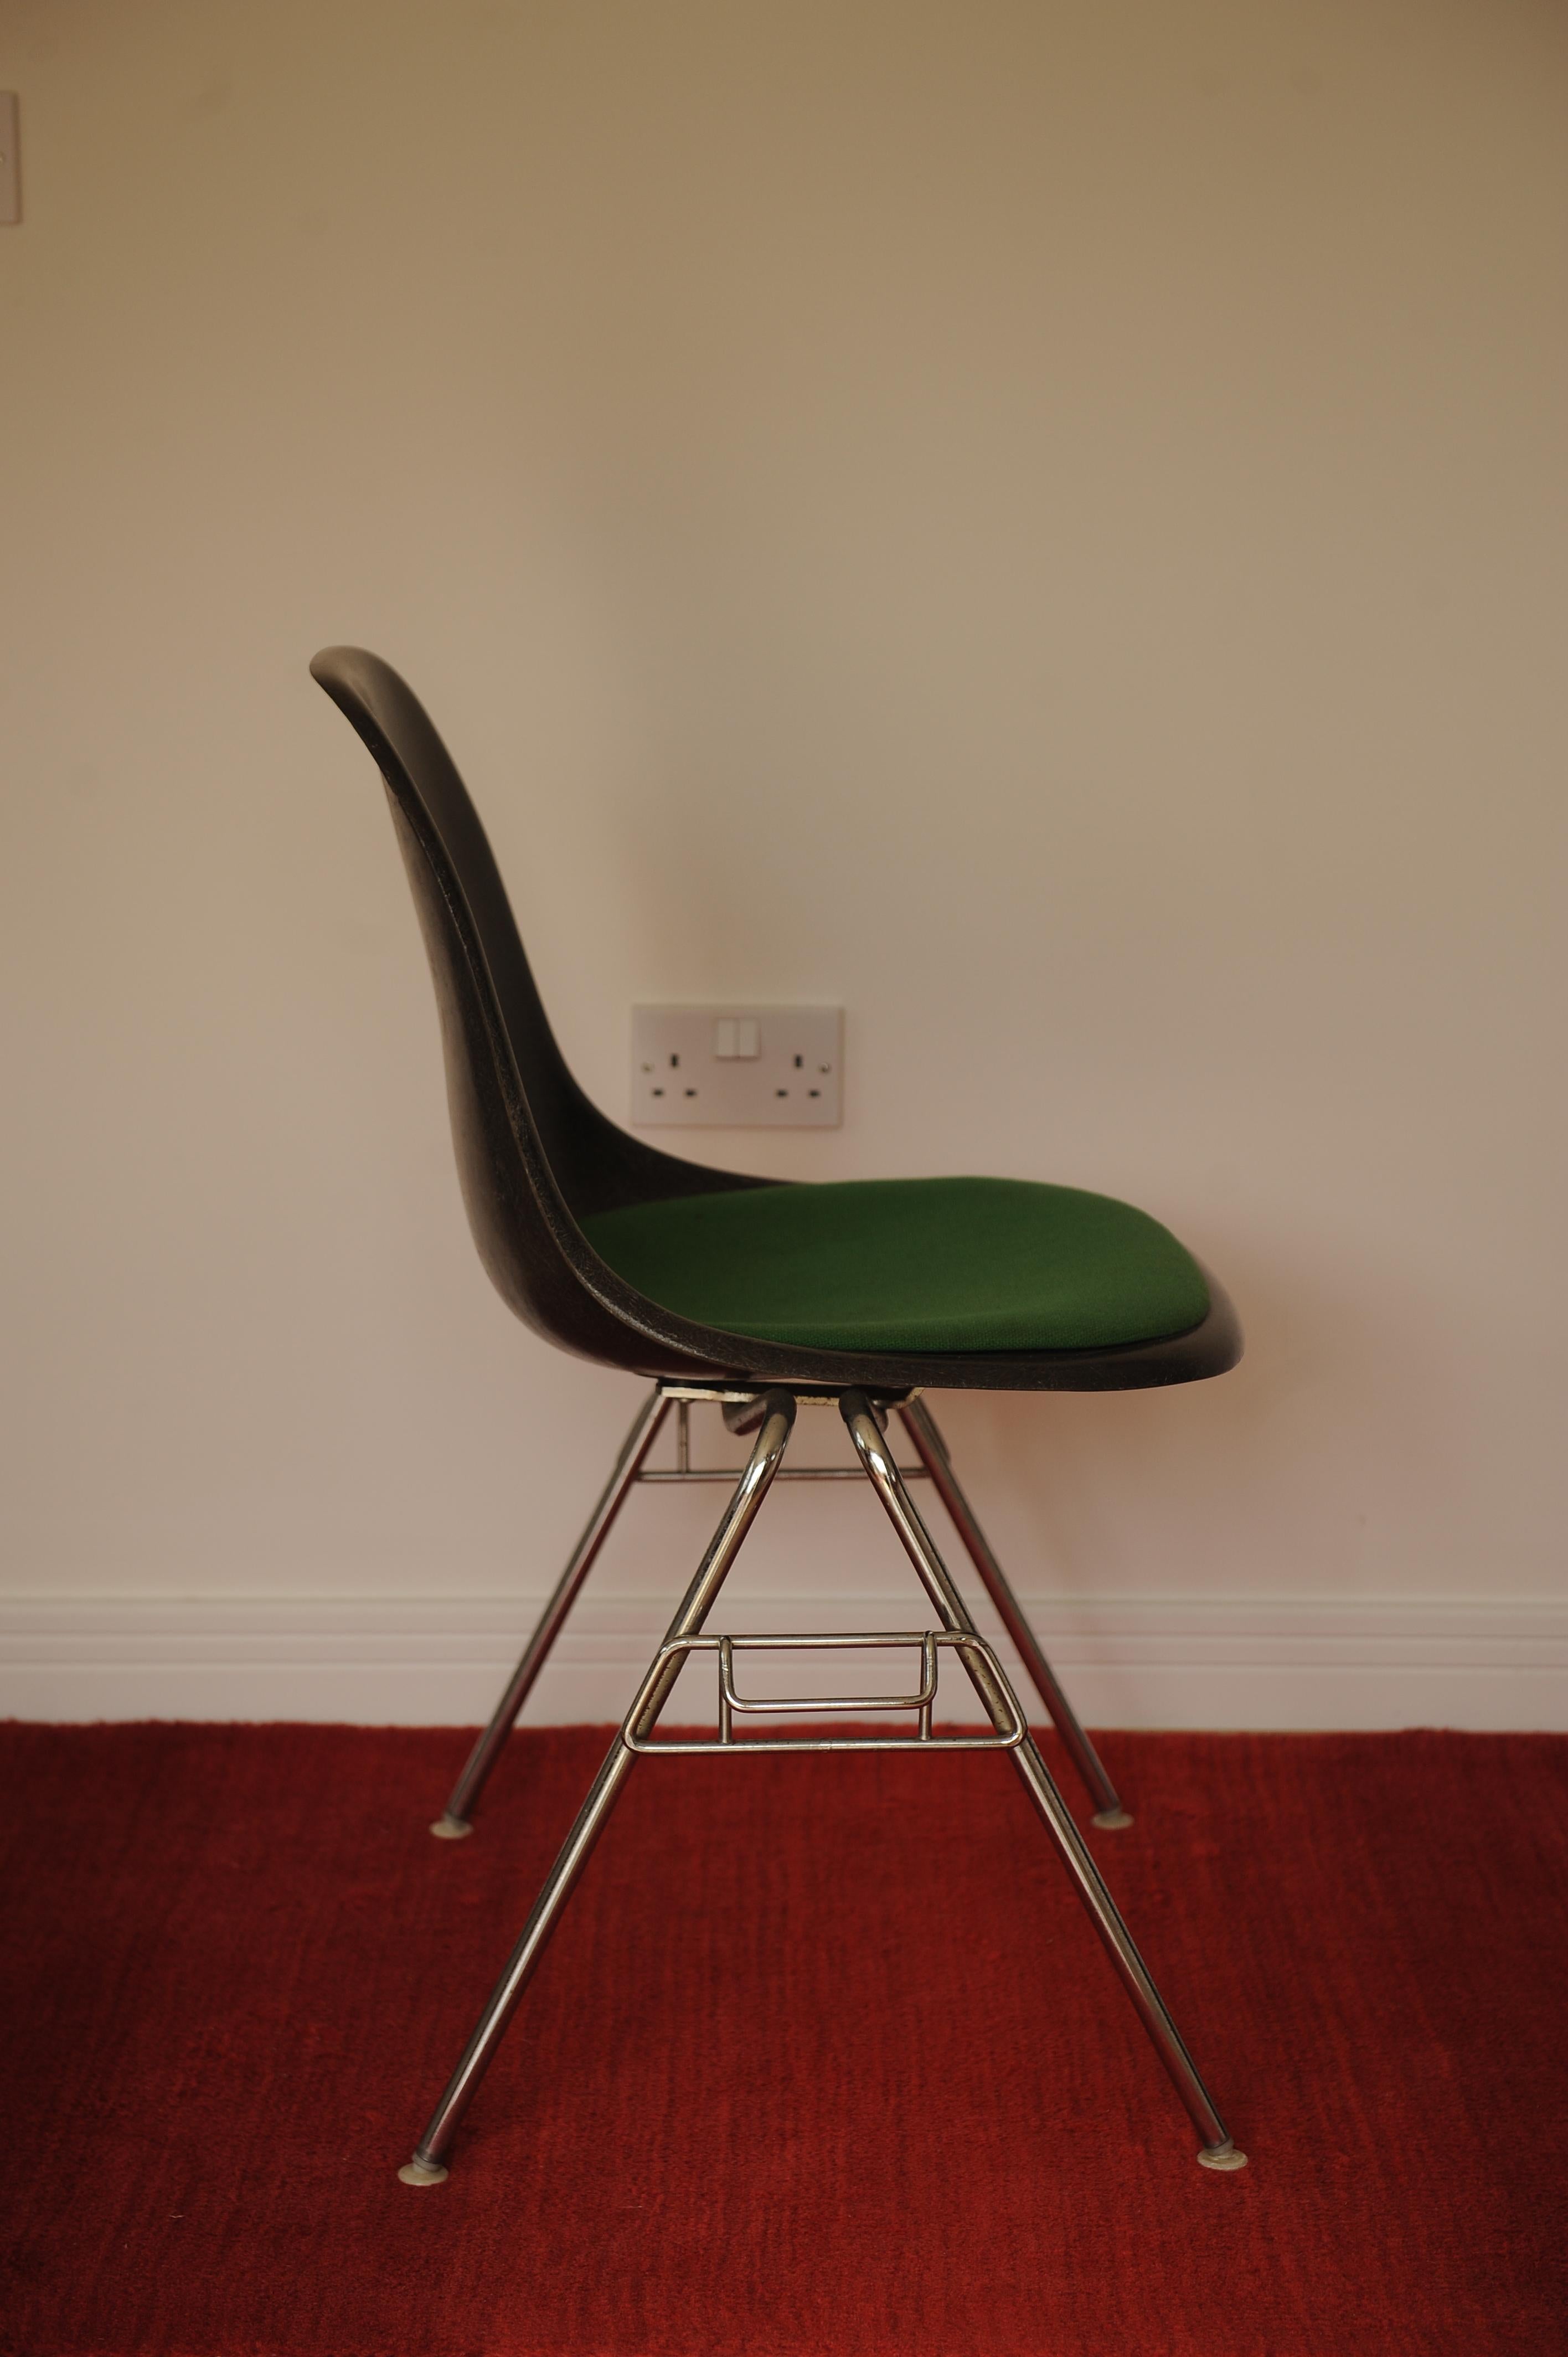 Brushed Charles & Ray Eames Herman Miller Original Dss Fiberglass Chrome Stacking Chair  For Sale